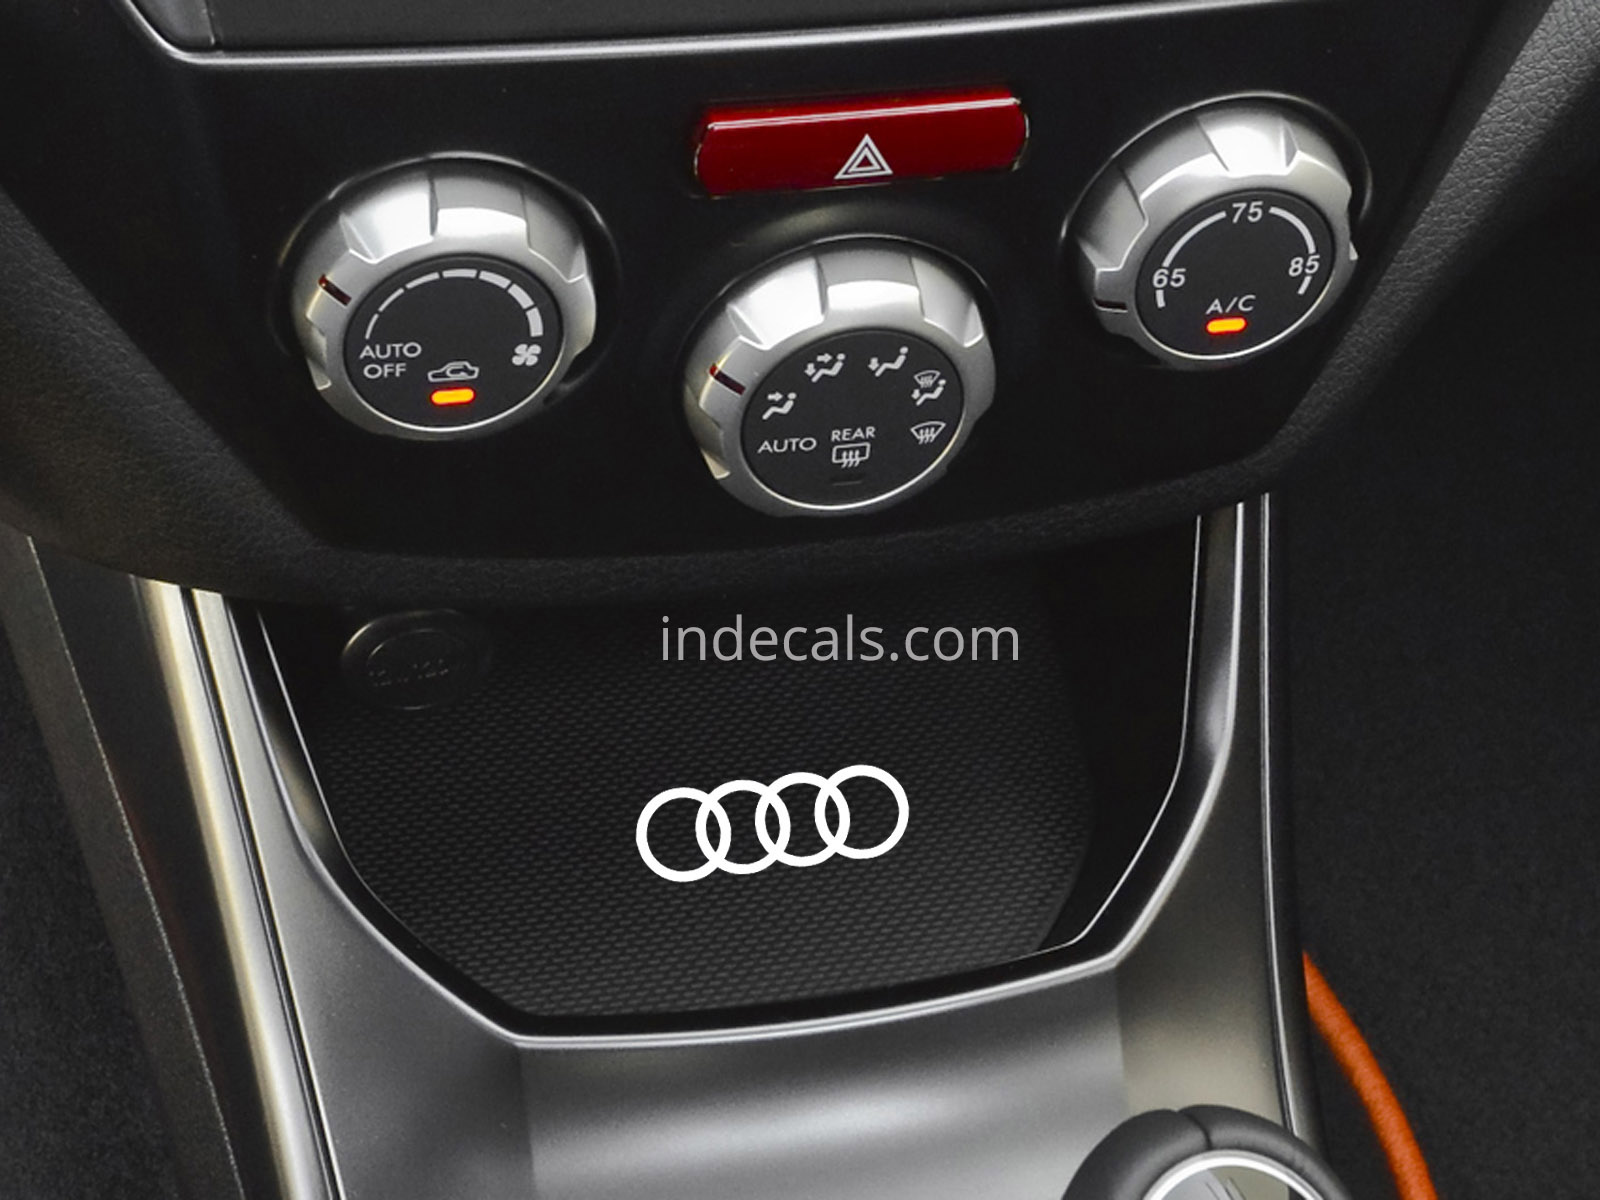 3 x Audi Rings Stickers for Ashtray - White